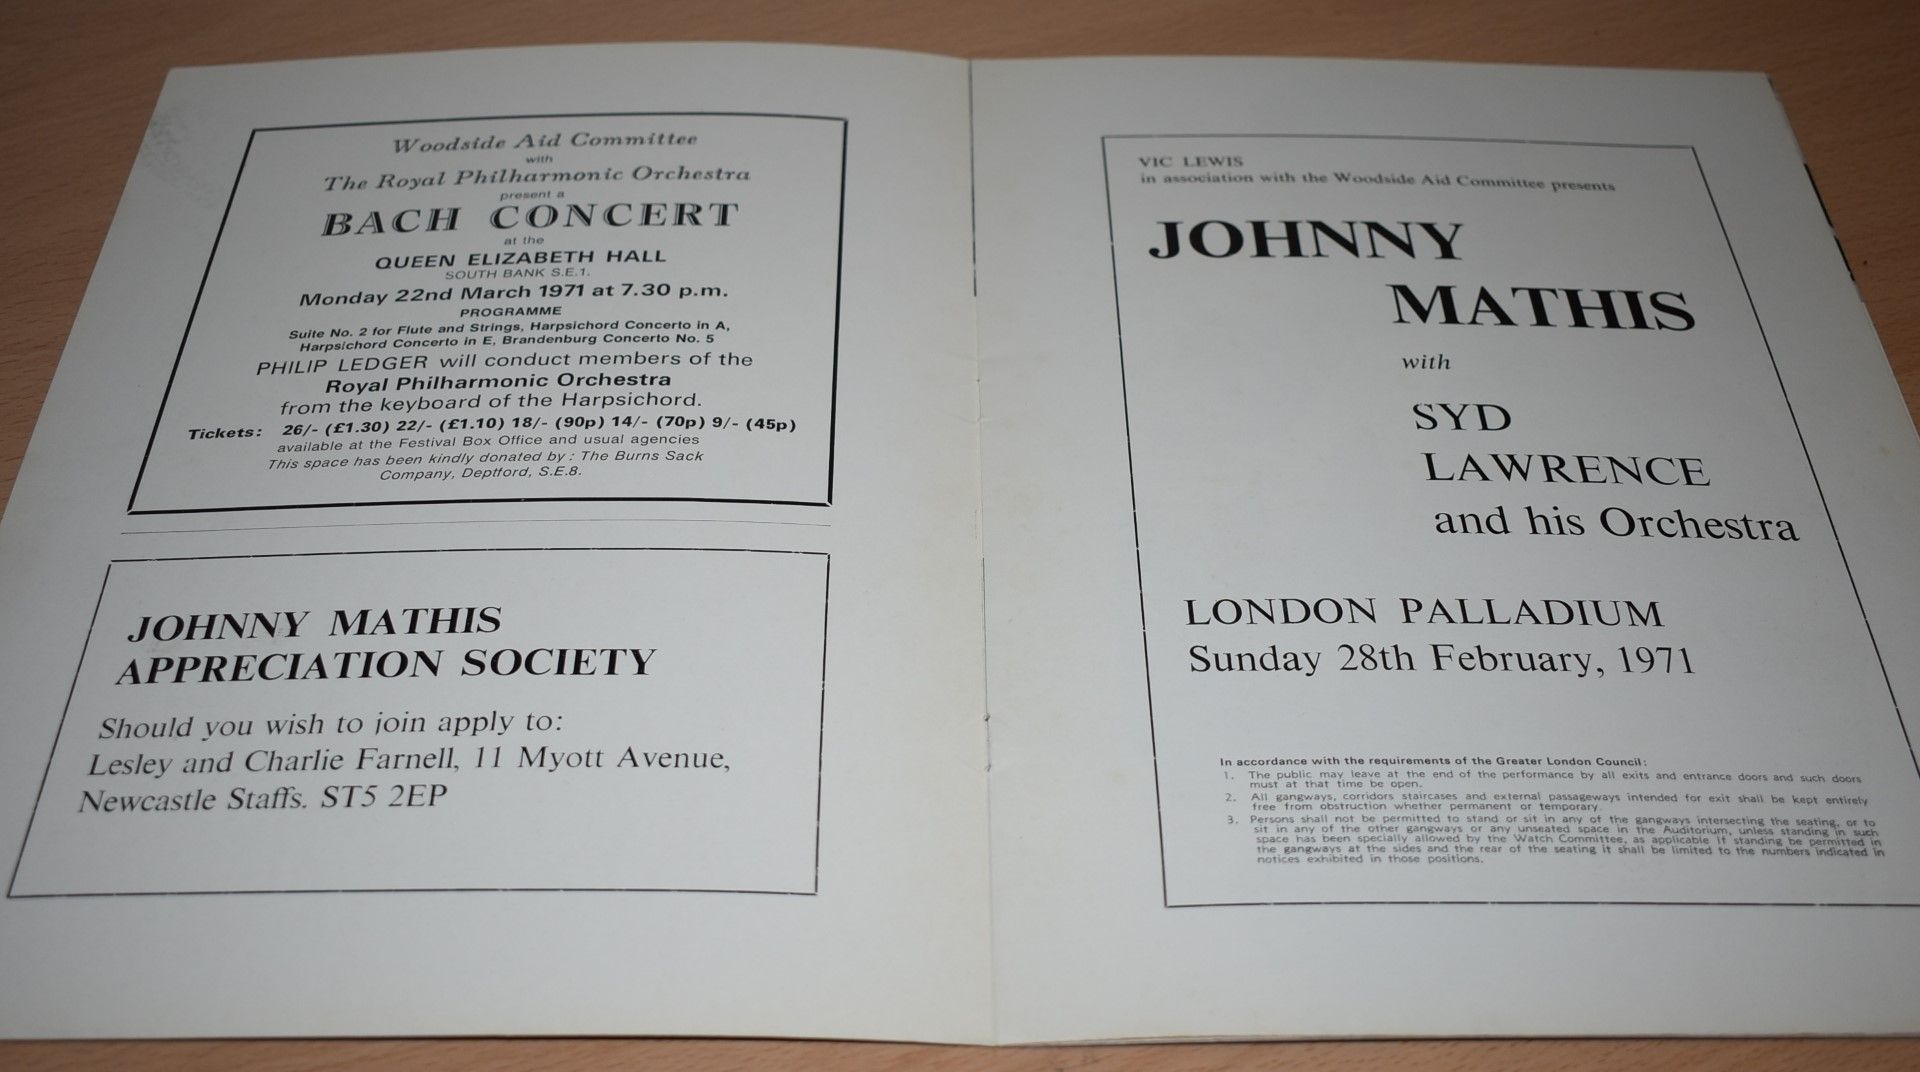 1 x Johnny Mathis With Syd Lawrence and His Orchestra - London Palladium 1971 Brochure - Ref MB138 - - Image 2 of 3